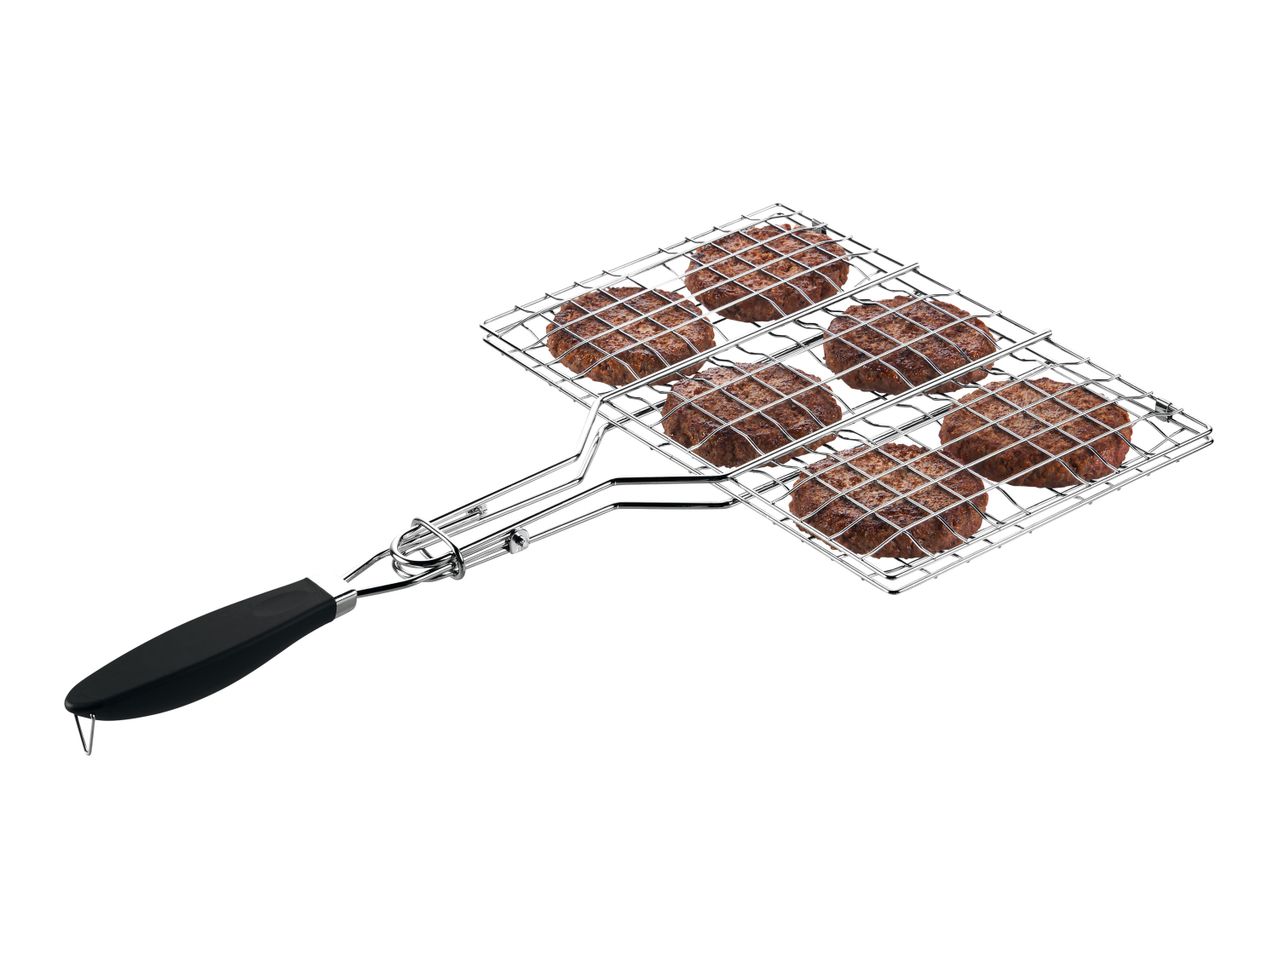 Go to full screen view: Grillmeister BBQ Basket - Image 2